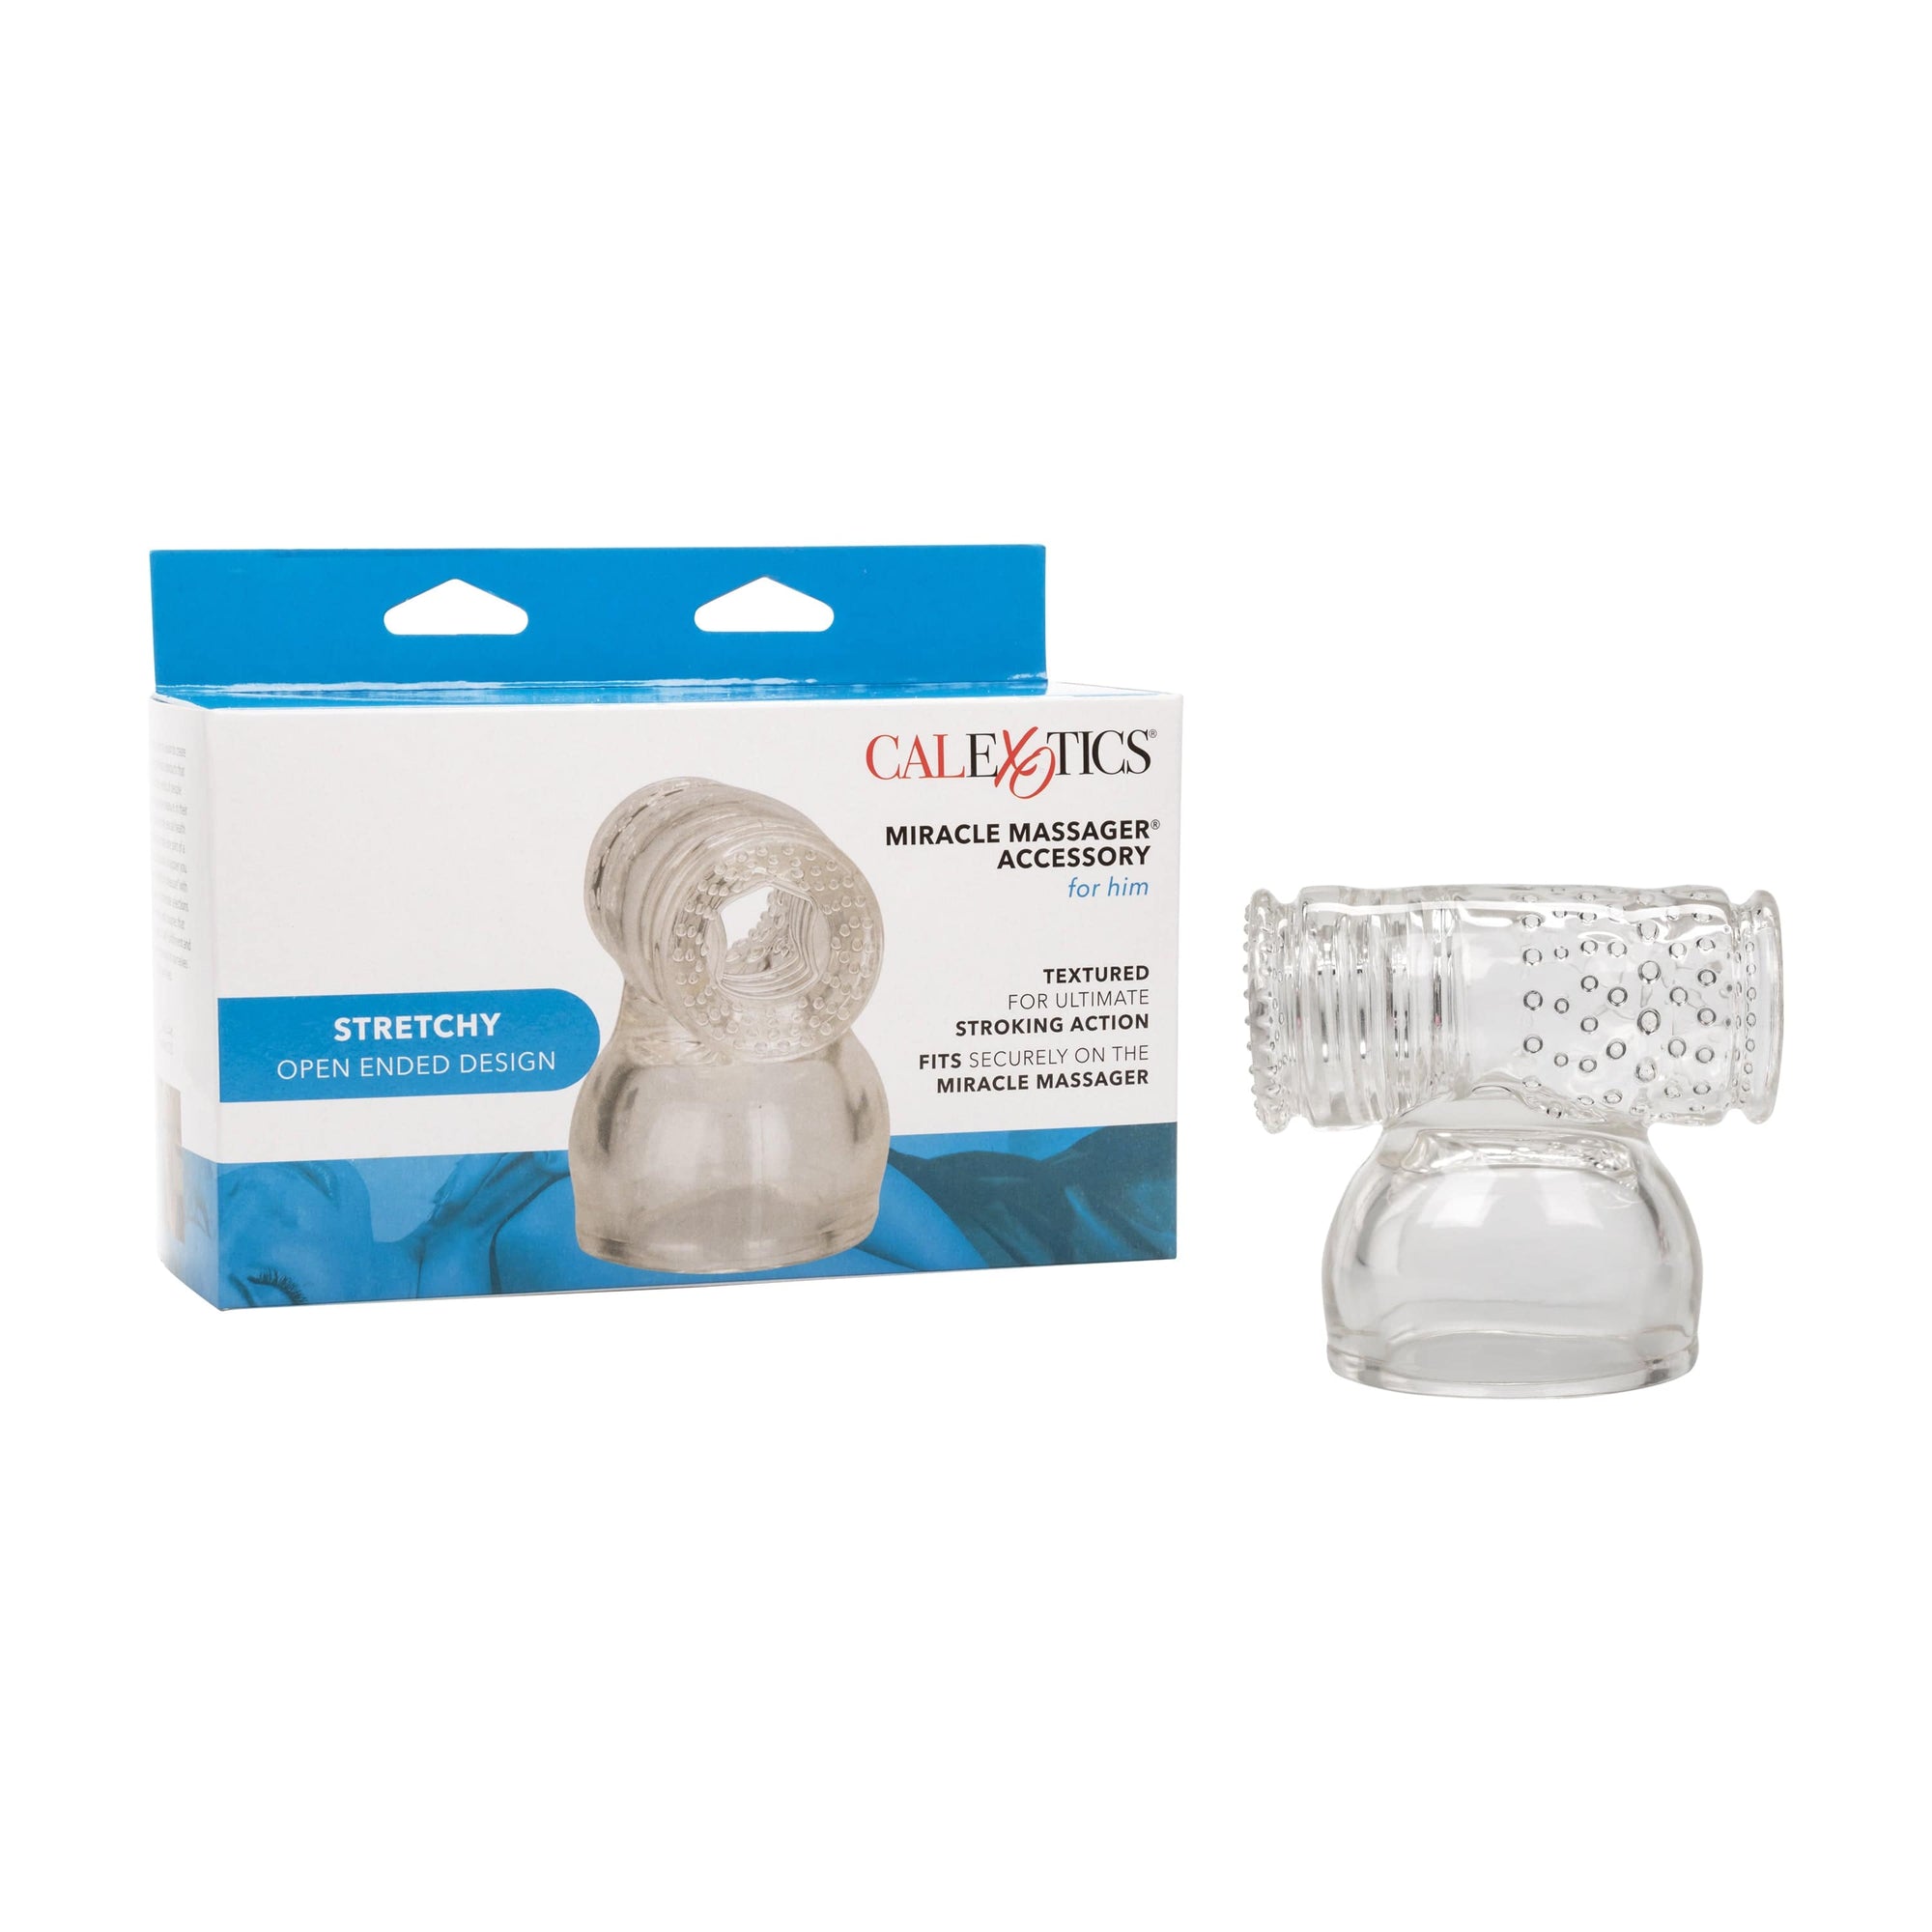 California Exotics - Miracle Massager Accessory For Him (Clear) Accessories 716770052834 CherryAffairs